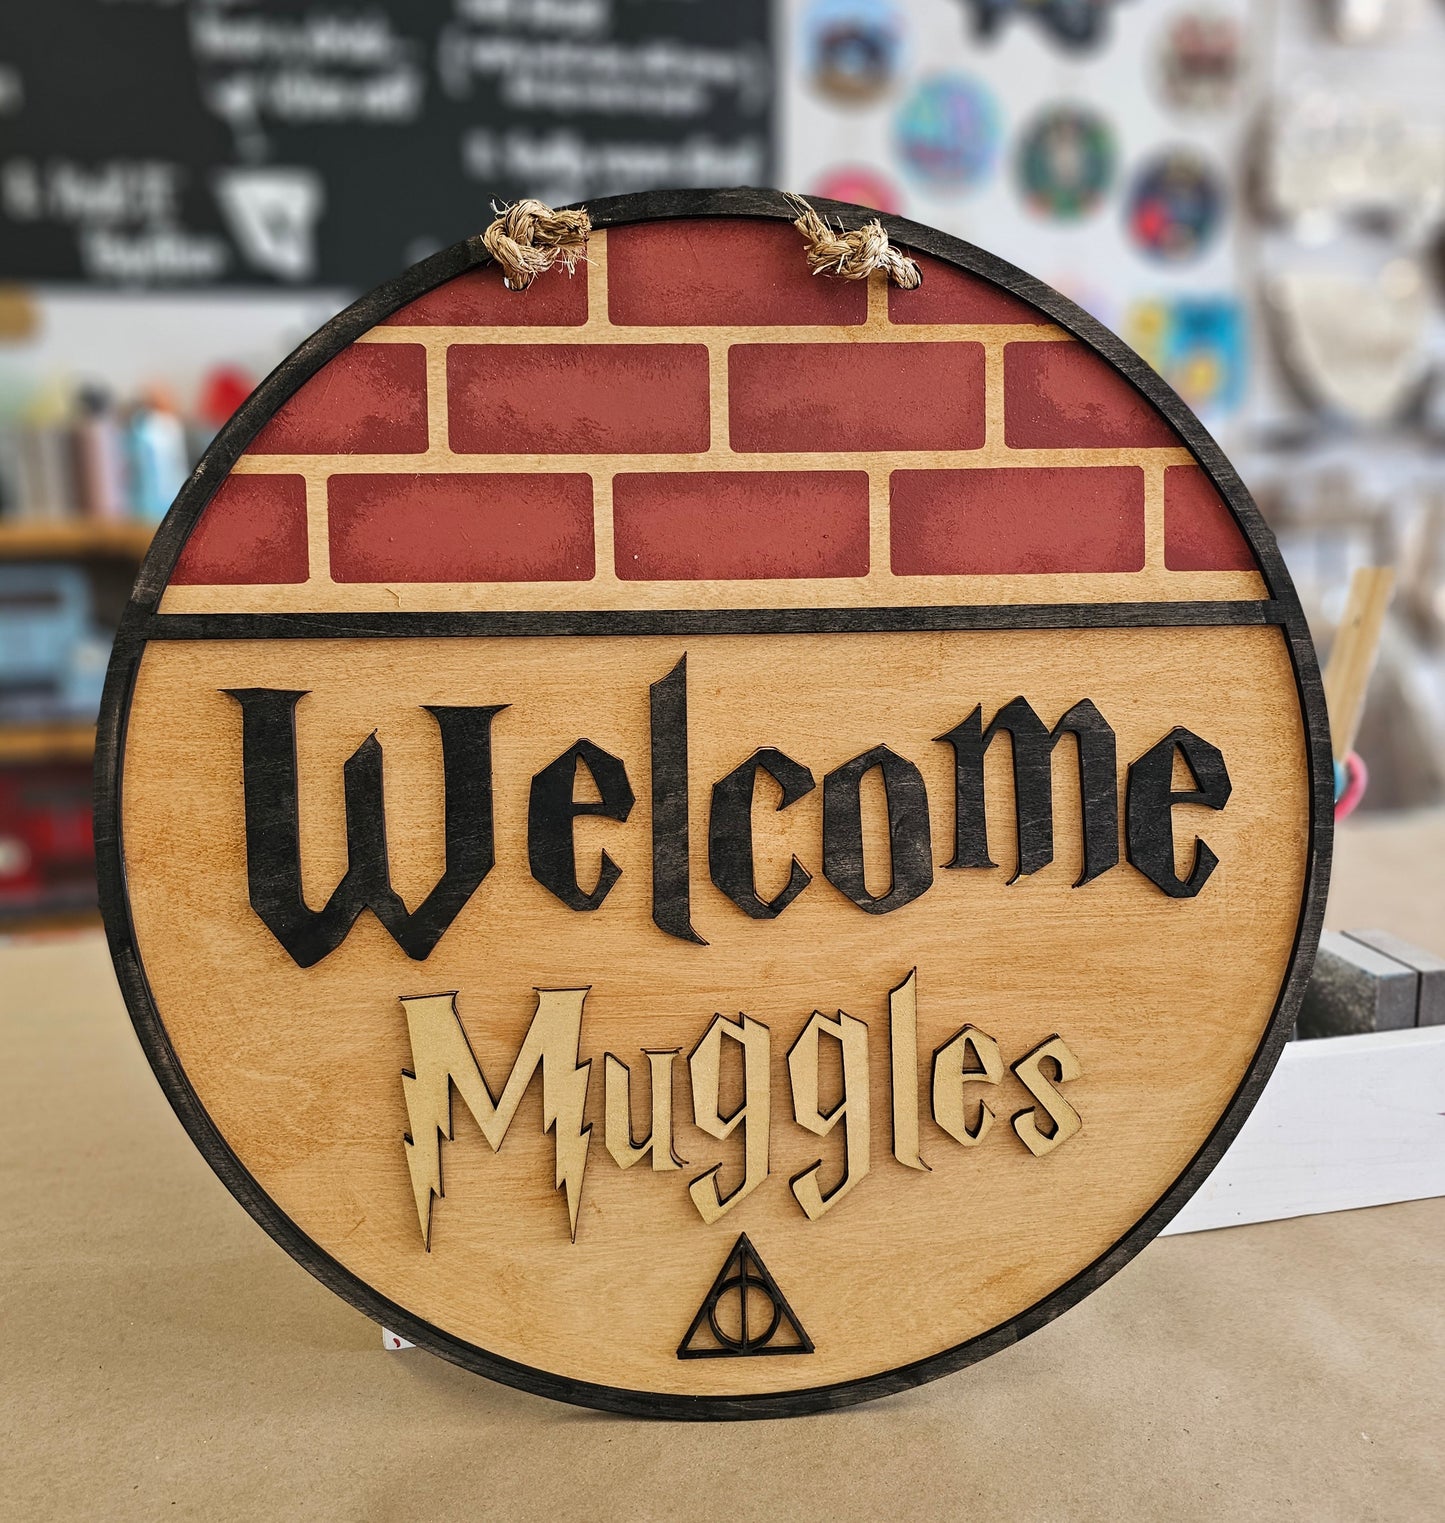 Harry Potter's Birthday Bash - August 5th @ 12pm-3pm (All Ages)